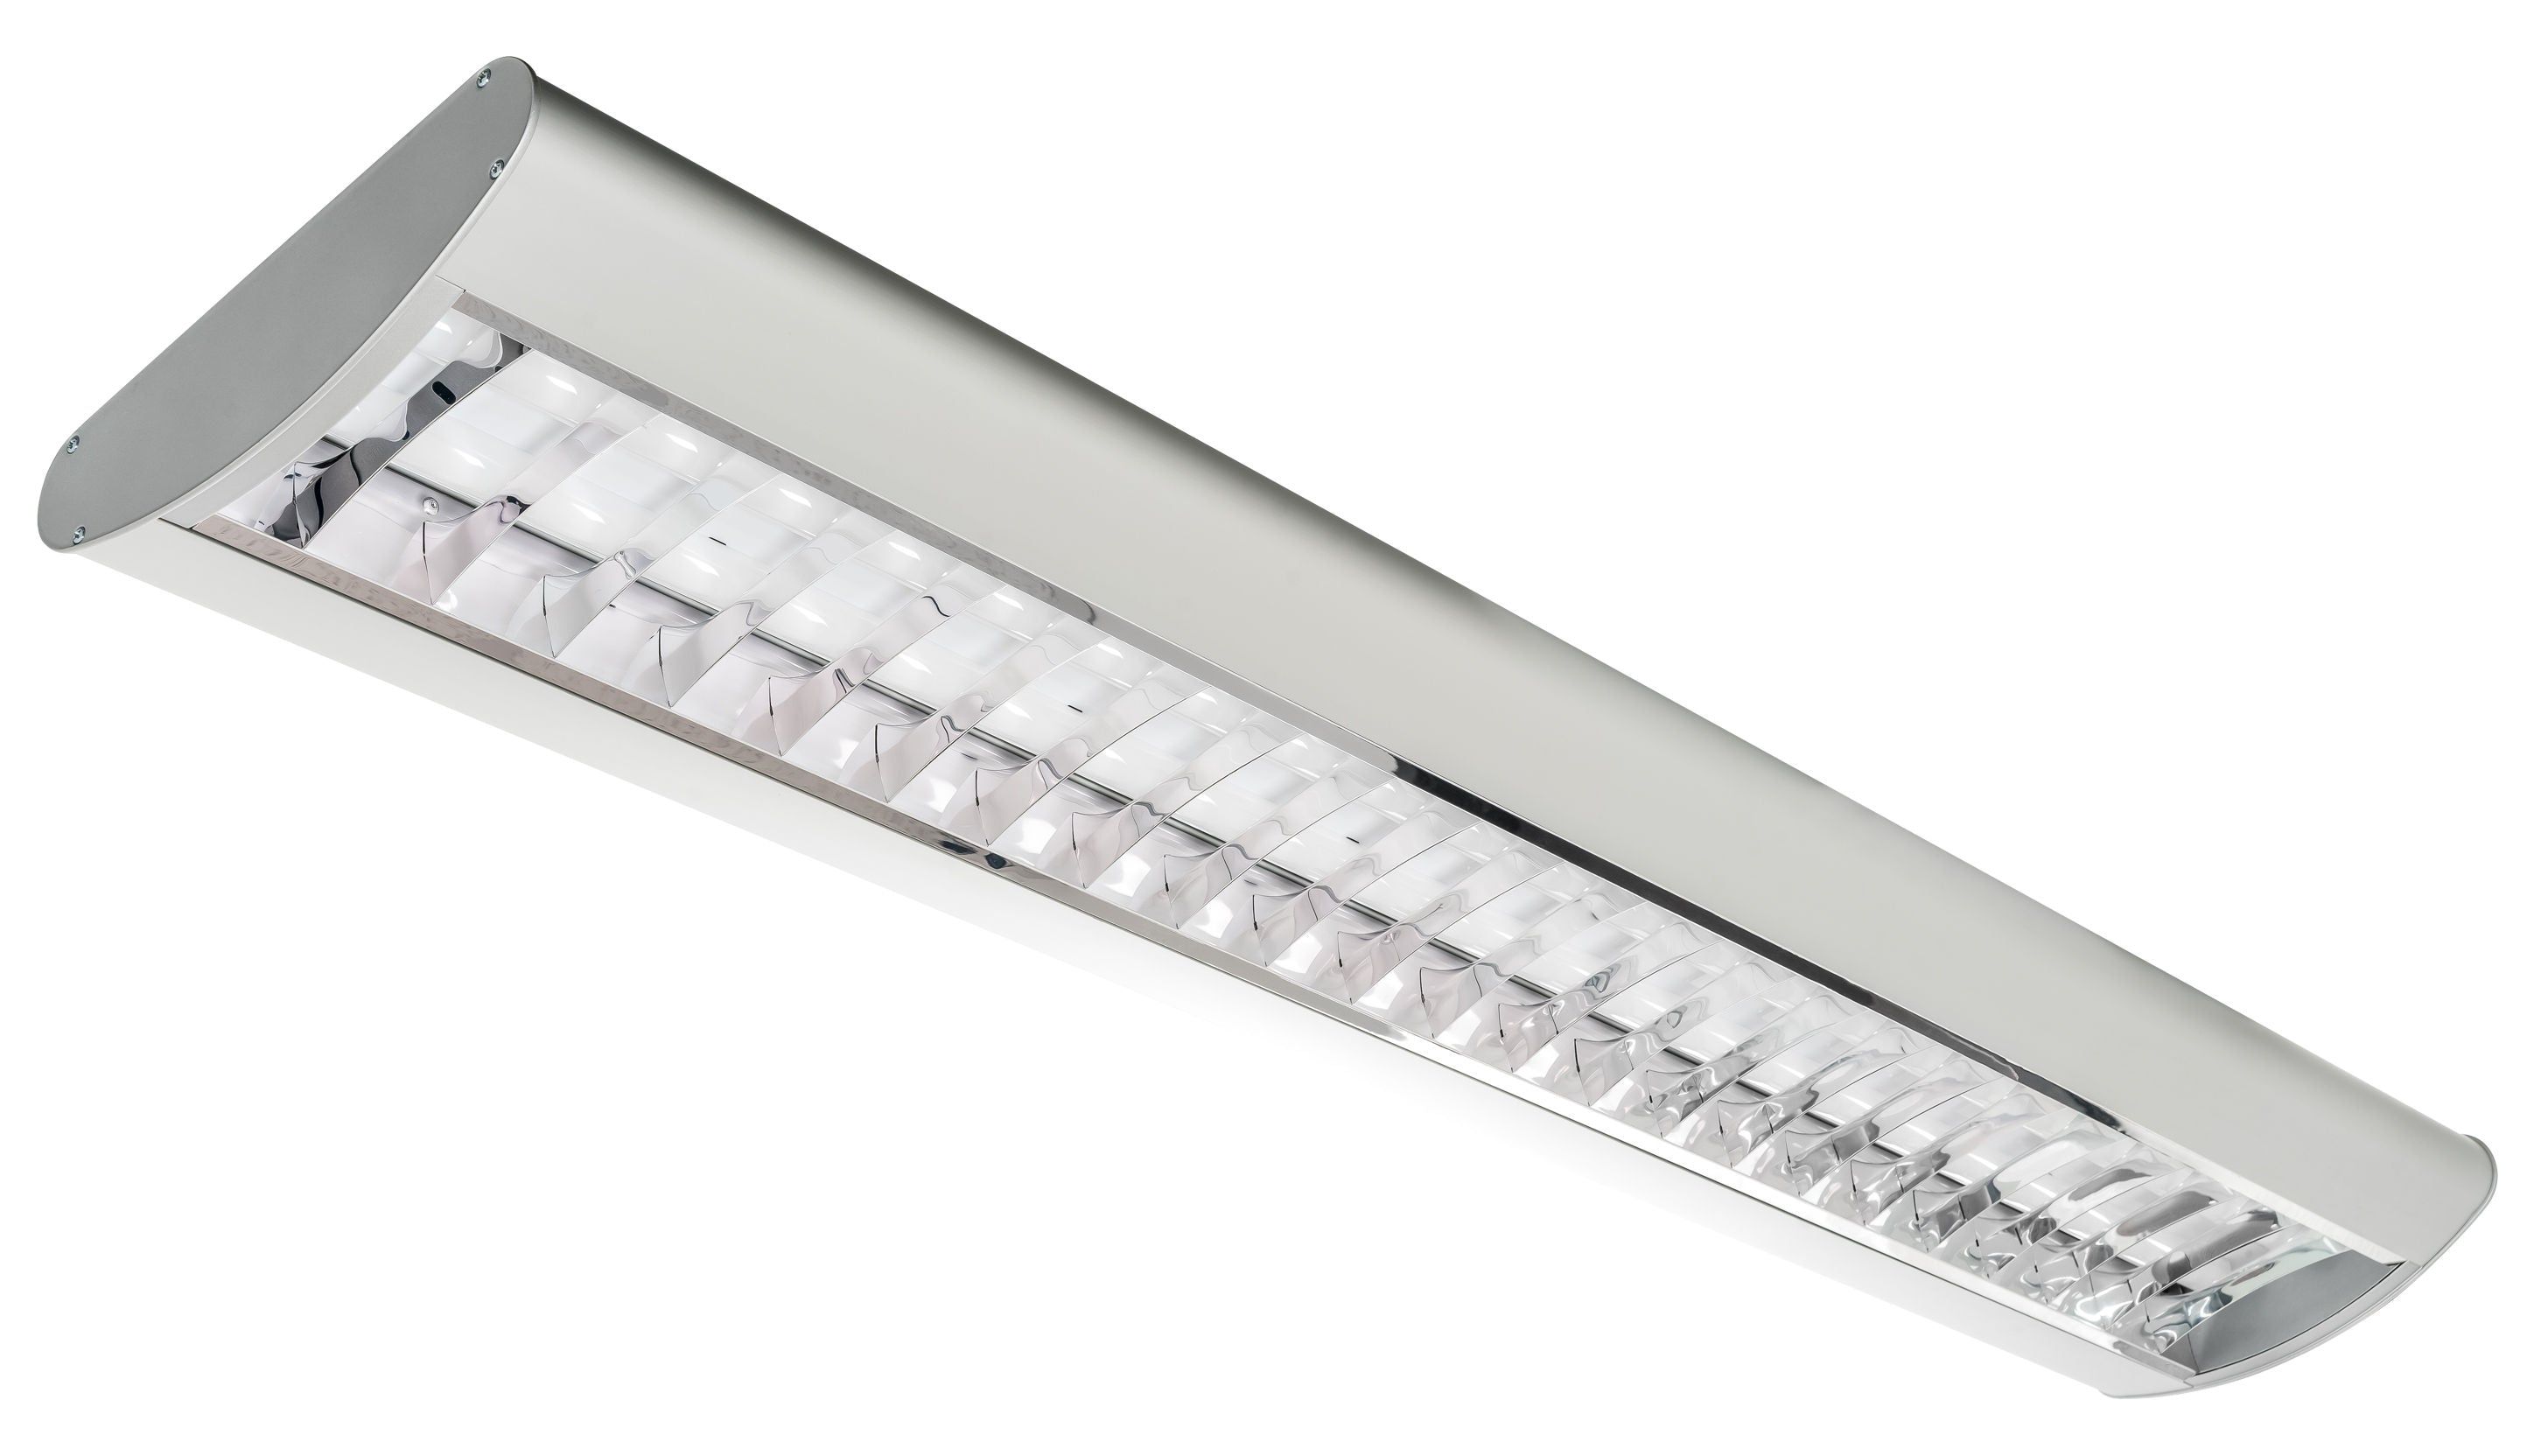 Westgate SCLP-4FT-40W-35K-D LED Architectural Parabolic Suspended Down Light - White